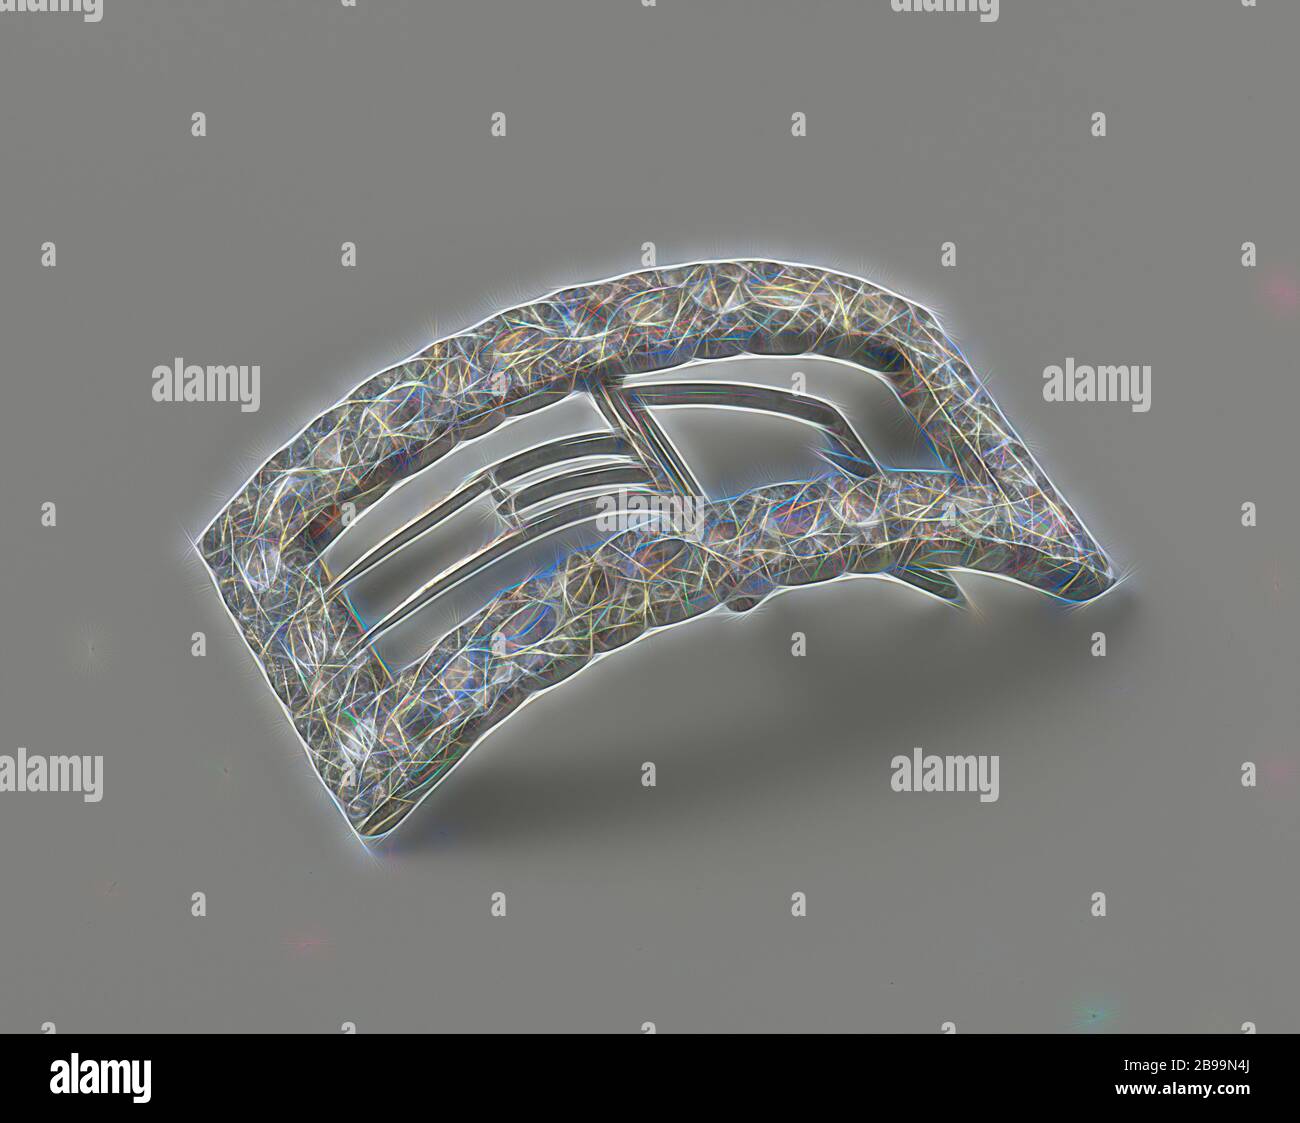 Buckle, rectangular and arched, consisting of center edge of alternately large oval and round rhinestones, framed by smaller rhinestones, Shoe buckle for a men's shoe, or a belt buckle of strassz in white metal. A curved rectangle consists of a center border of alternately large oval and round strasz diamonds, framed by smaller strasz diamonds. Close mounting of silver-plated copper (?). Two sharp teeth of iron for confirmation., anonymous, France, c. 1775 - c. 1800, paste (glass), iron (metal), h 2.6 cm × w 9.5 cm × d 5.1 cm, Reimagined by Gibon, design of warm cheerful glowing of brightness Stock Photo